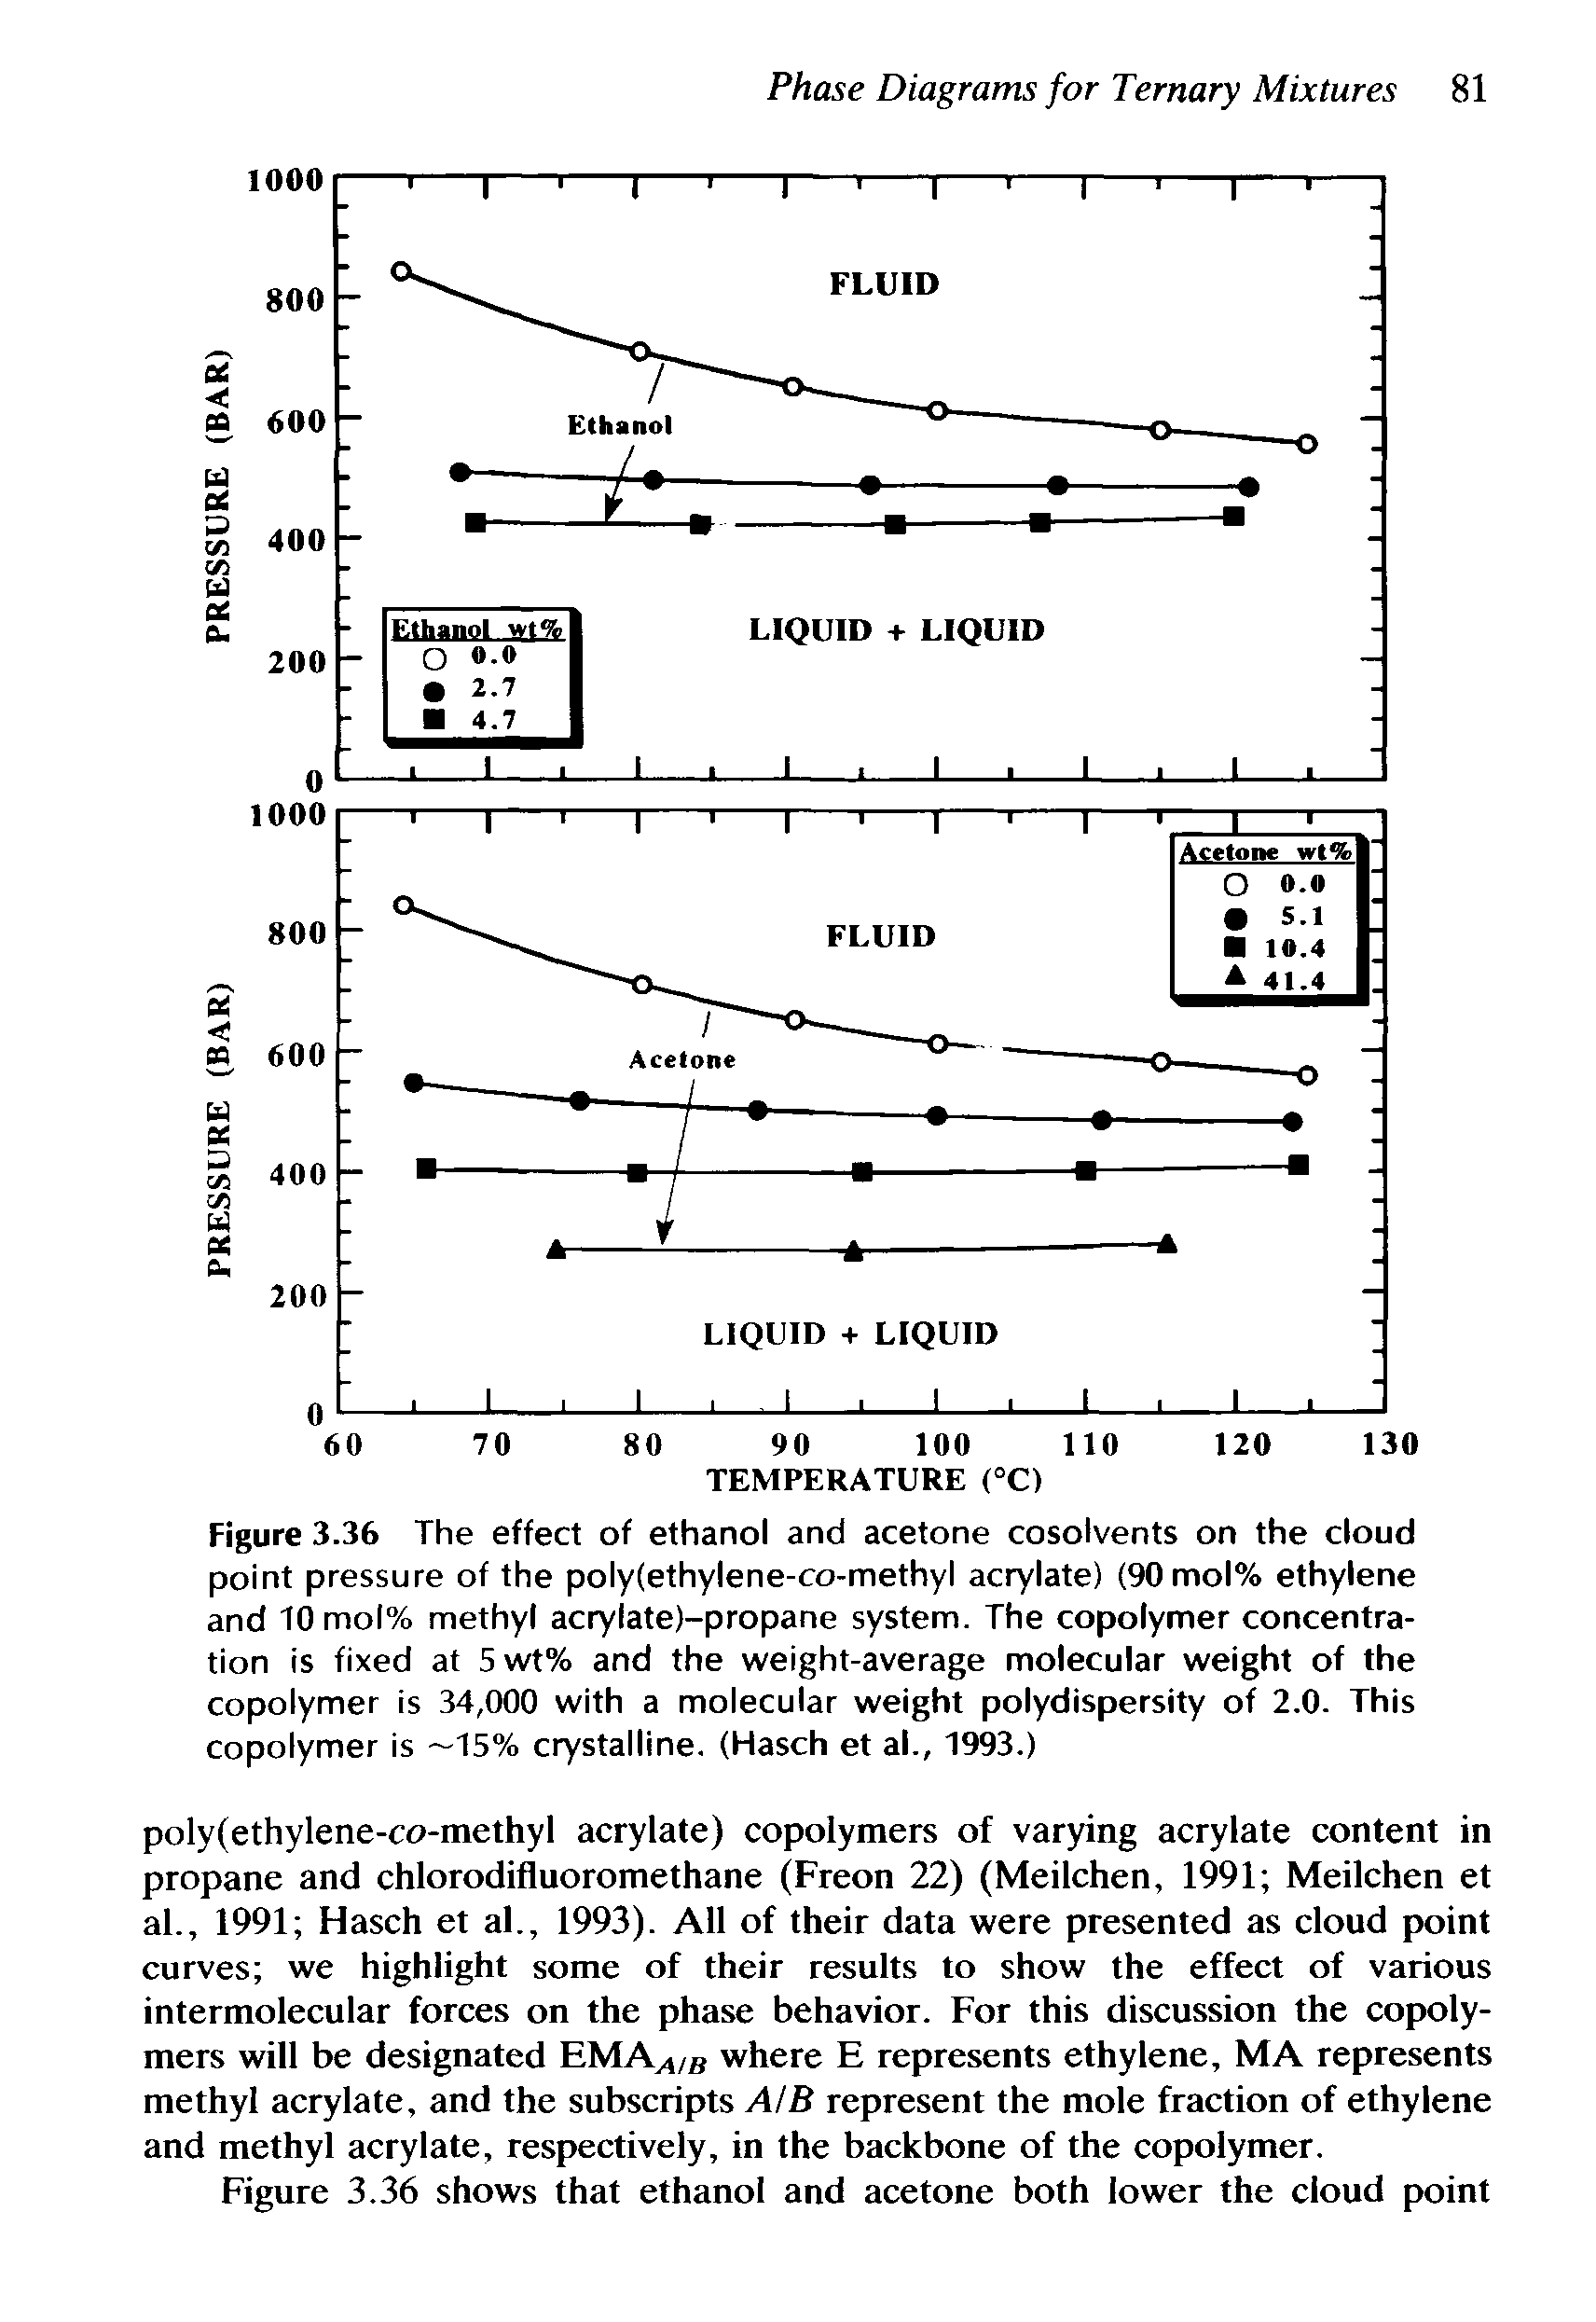 Figure 3.36 The effect of ethanol and acetone cosolvents on the cloud point pressure of the poly(ethylene-co-methyl acrylate) (90mol% ethylene and 10 mol% methyl acrylate)-propane system. The copolymer concentration is fixed at 5 wt% and the weight-average molecular weight of the copolymer is 34,000 with a molecular weight polydispersity of 2.0. This copolymer is —15% crystalline. (Hasch et al., 1993.)...